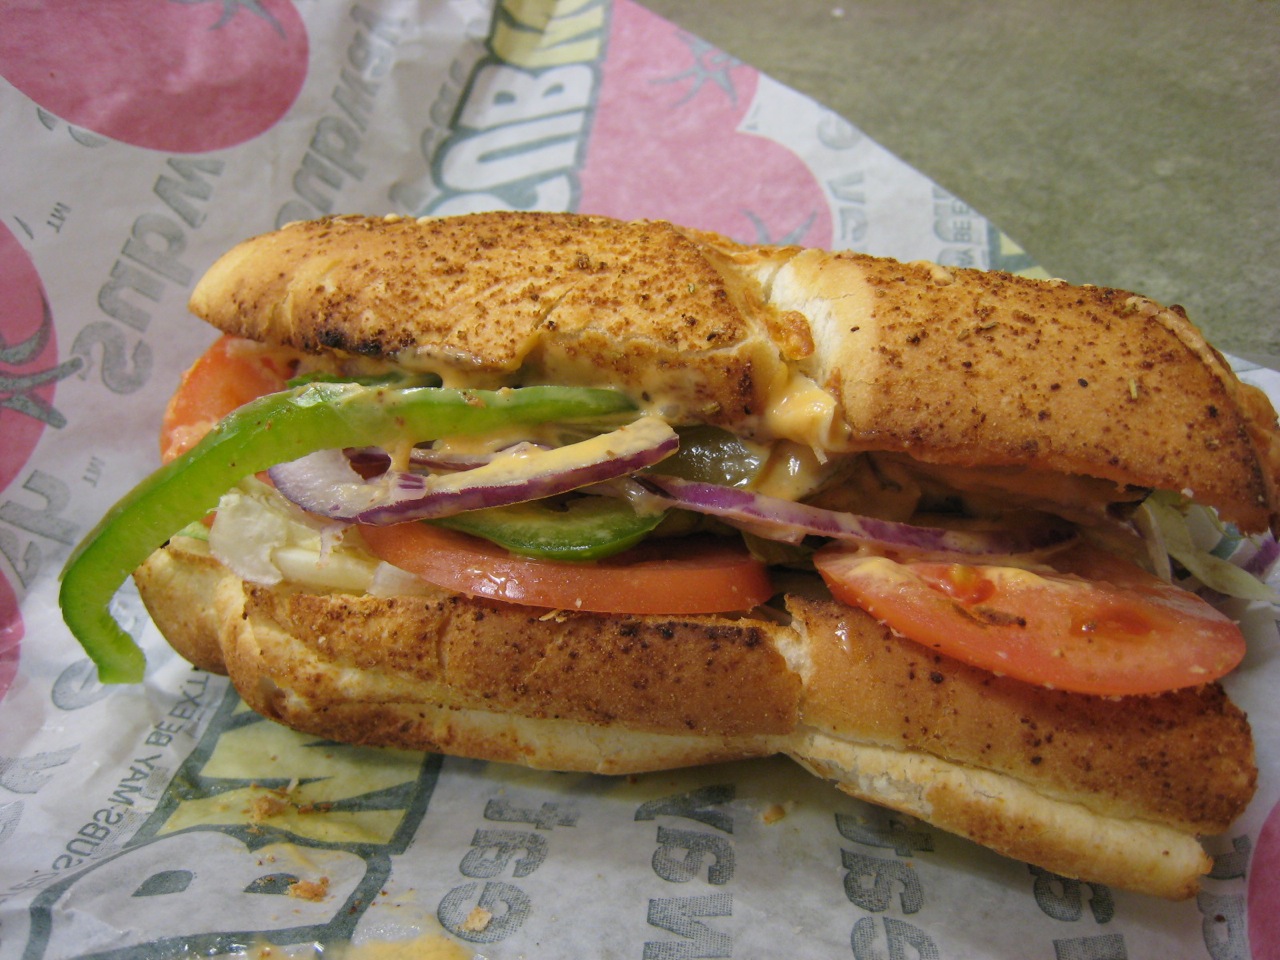 wandelen Woning domein Subway removes yoga-mat ingredient from its bread | Grist